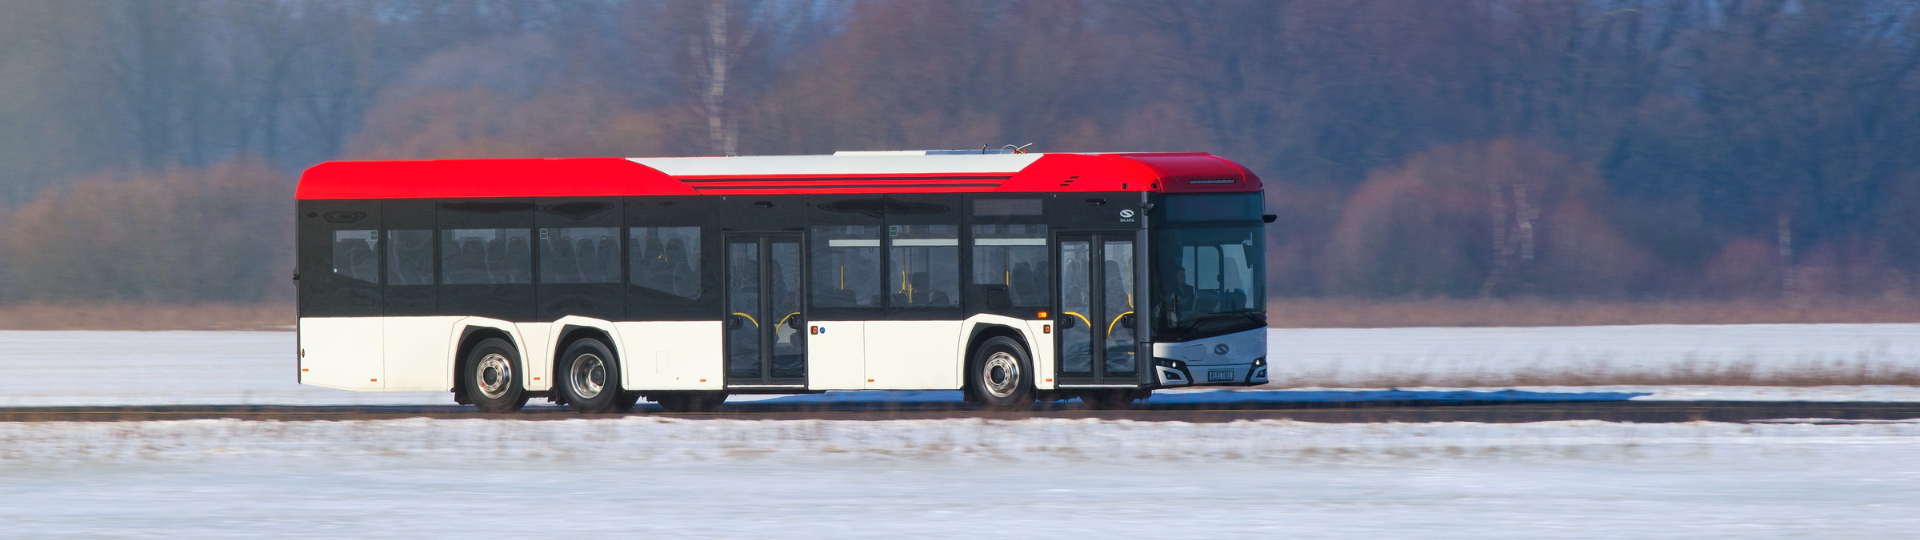 Nobina expands its green fleet: via the addition of 55 Solaris electric buses